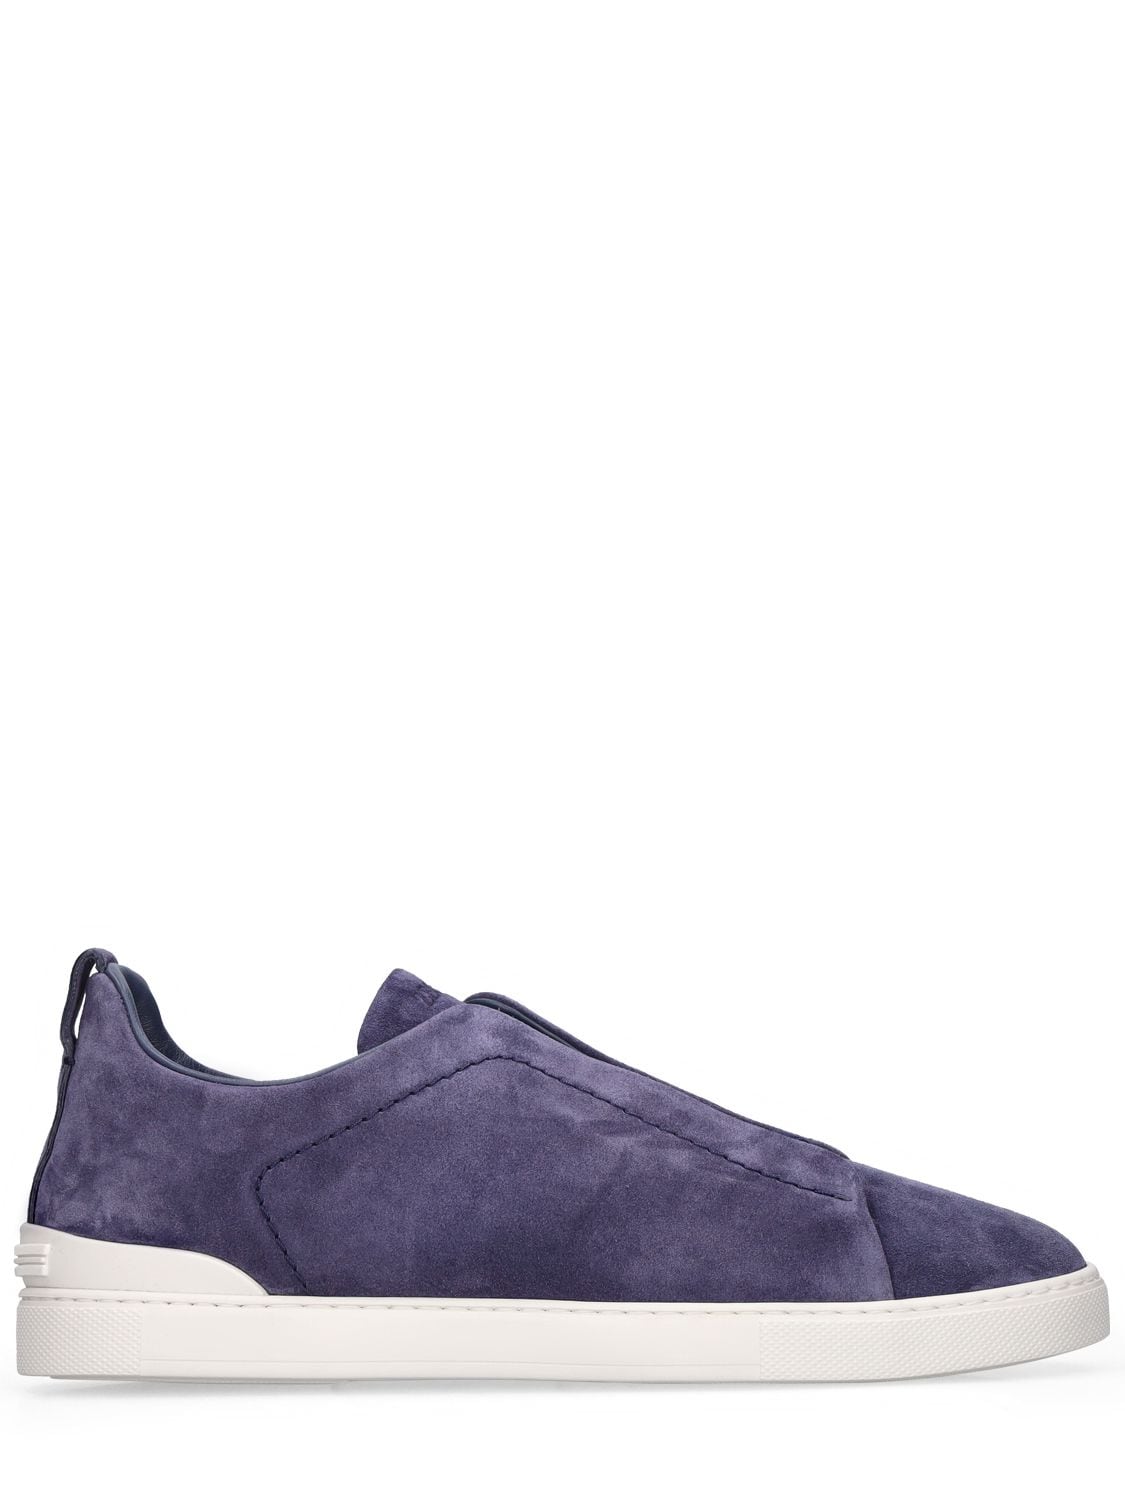 Zegna Triple Stitch Leather Low-top Sneakers In Blue